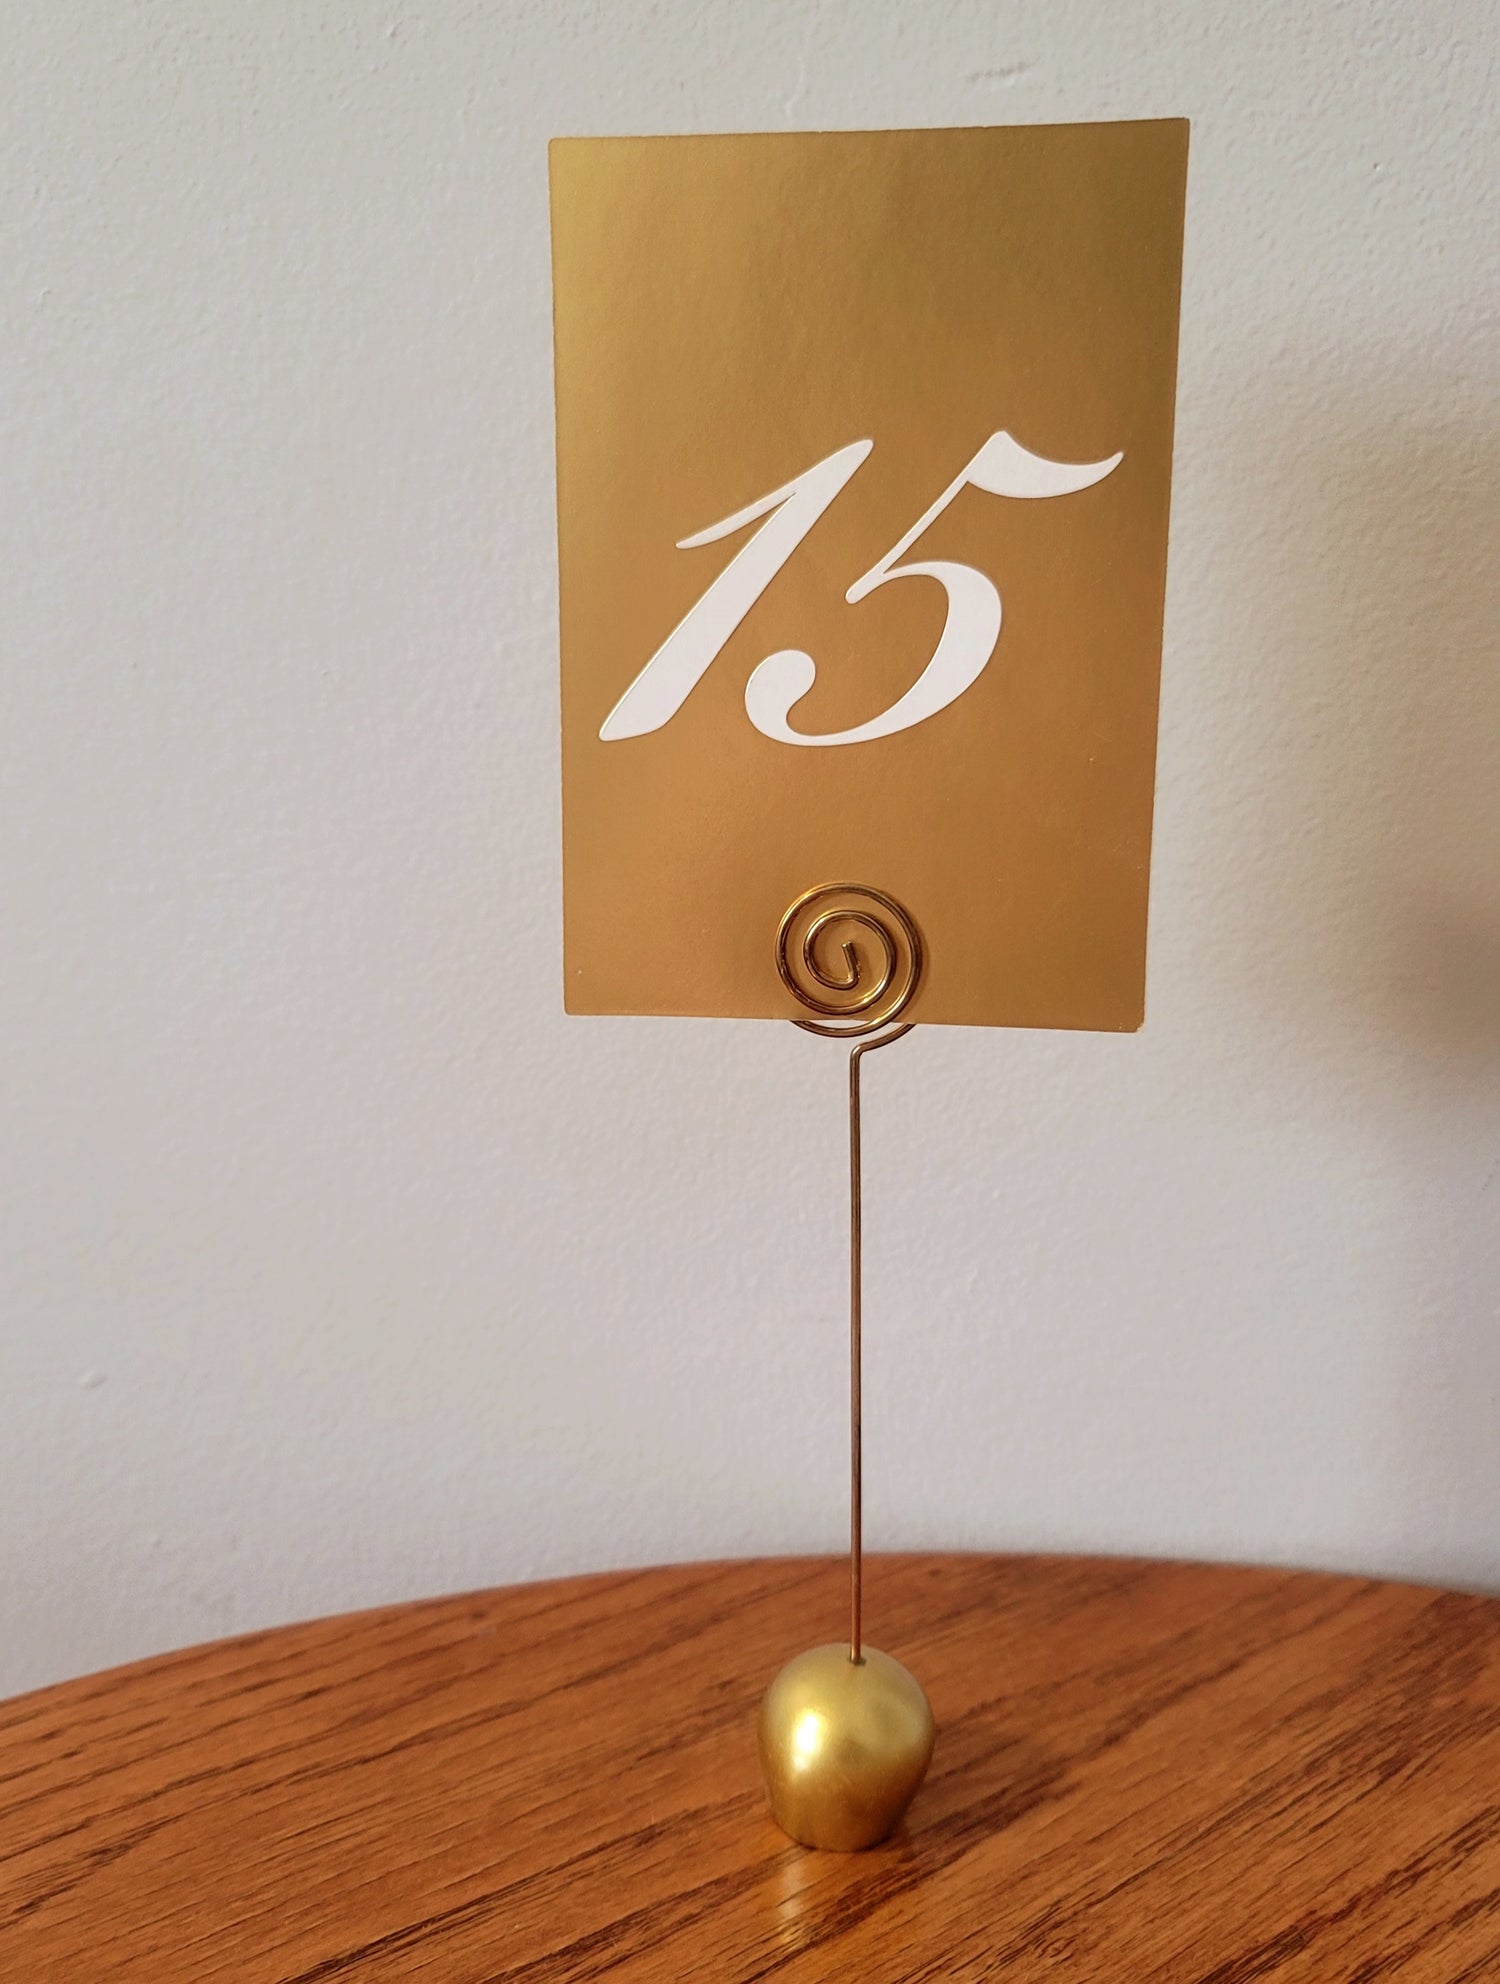 gold table numbers for rent in winnipeg, placecard holders for rent in winnipeg, vintage table numbers for rent in winnipeg